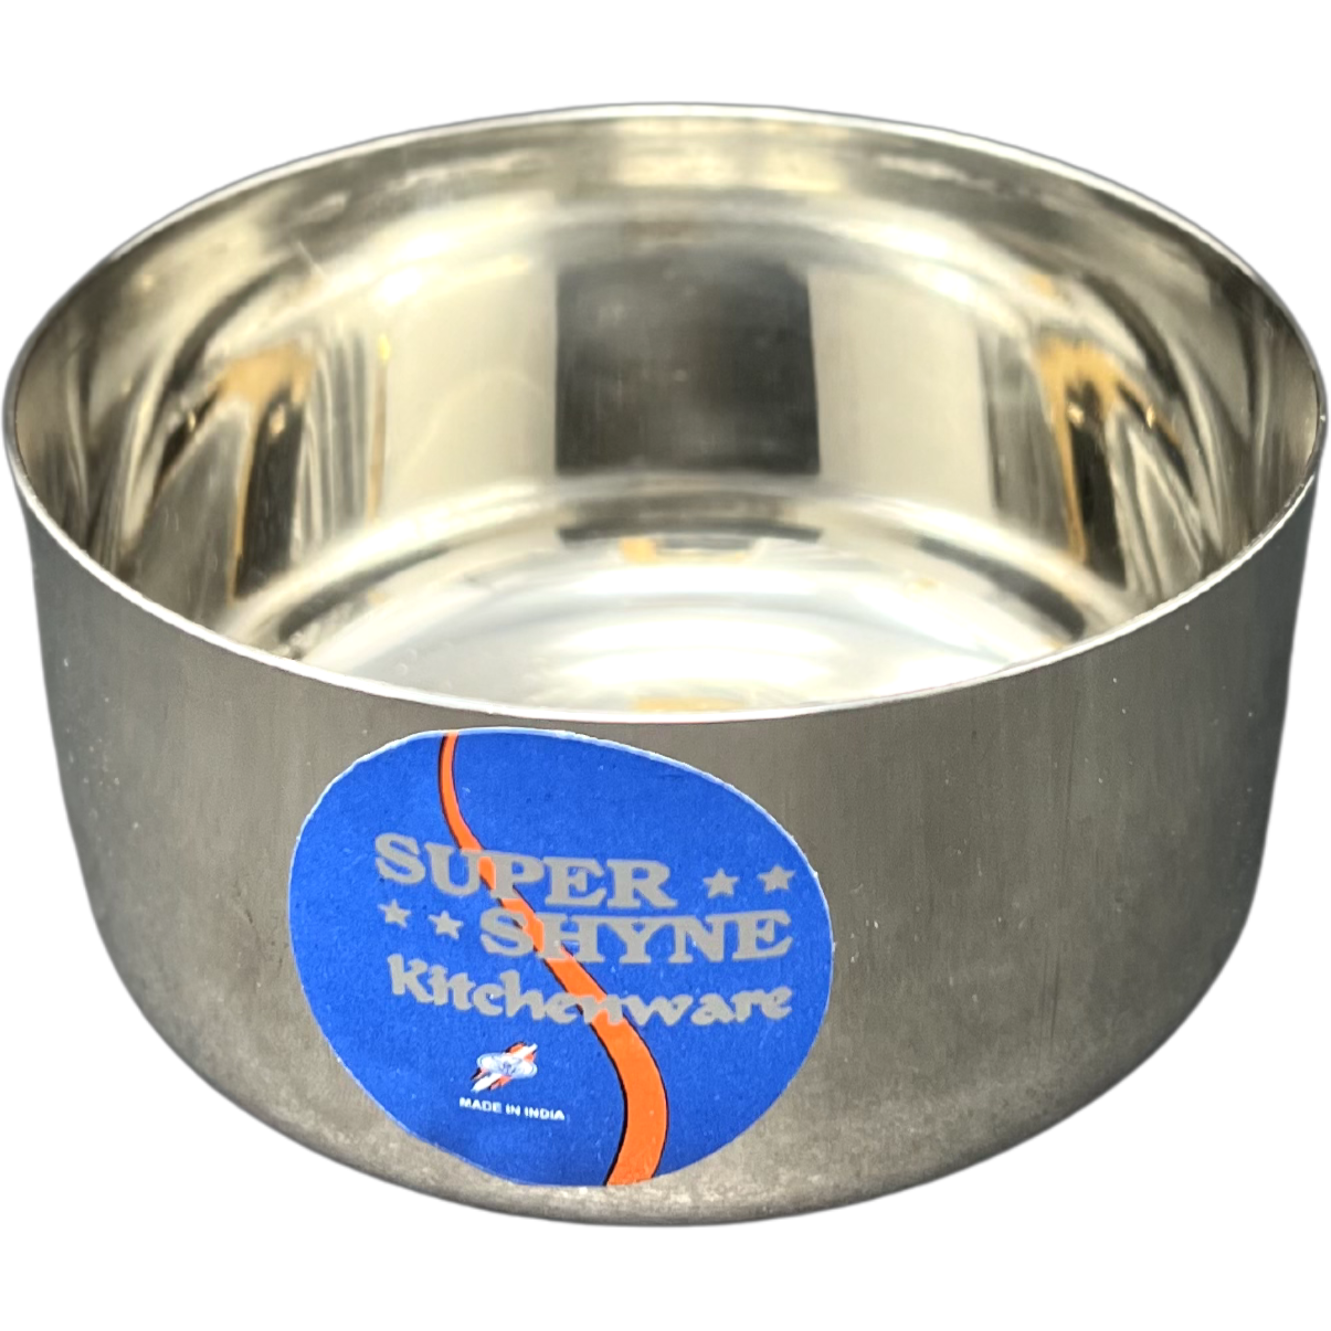 Case of 12 - Super Shyne Stainless Steel Bowl Small - 3.5 Inch